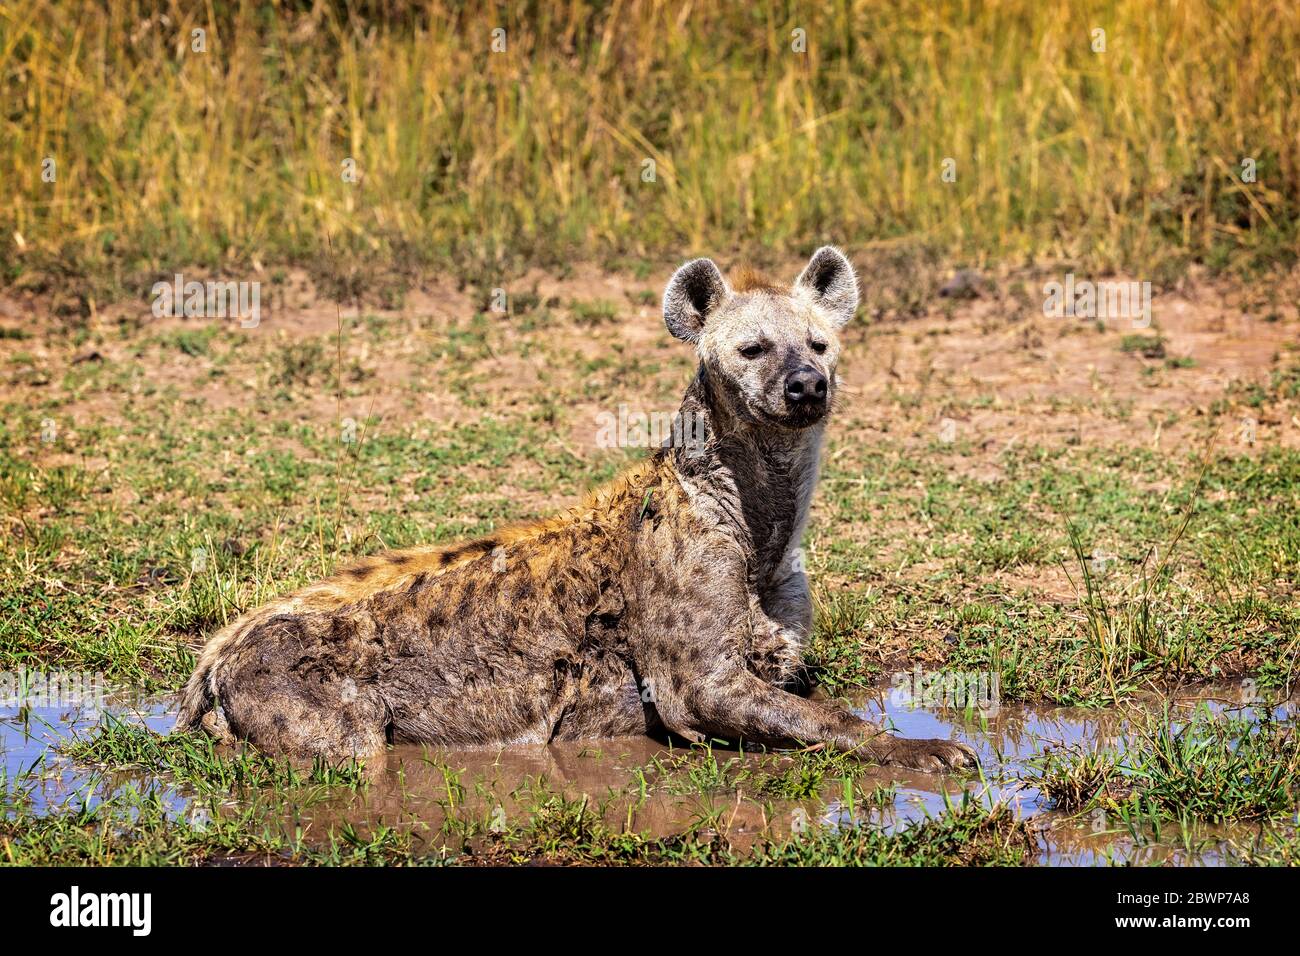 African Hyena lying in the mud cooling off in Kenya, Africa Stock Photo